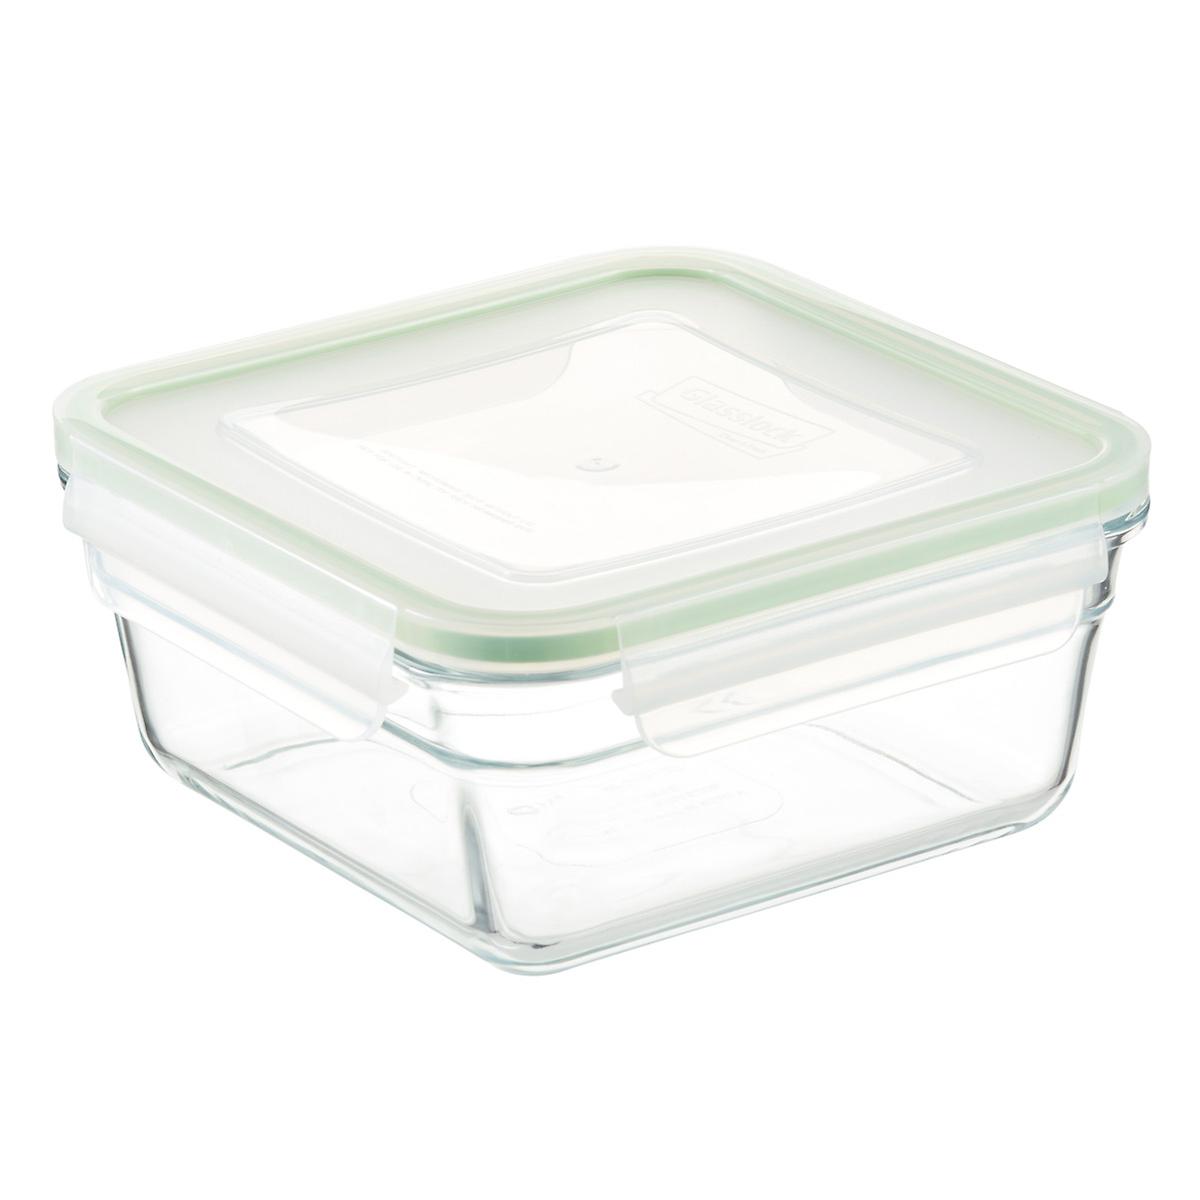 Glasslock Square Food Containers with Lids | The Container Store